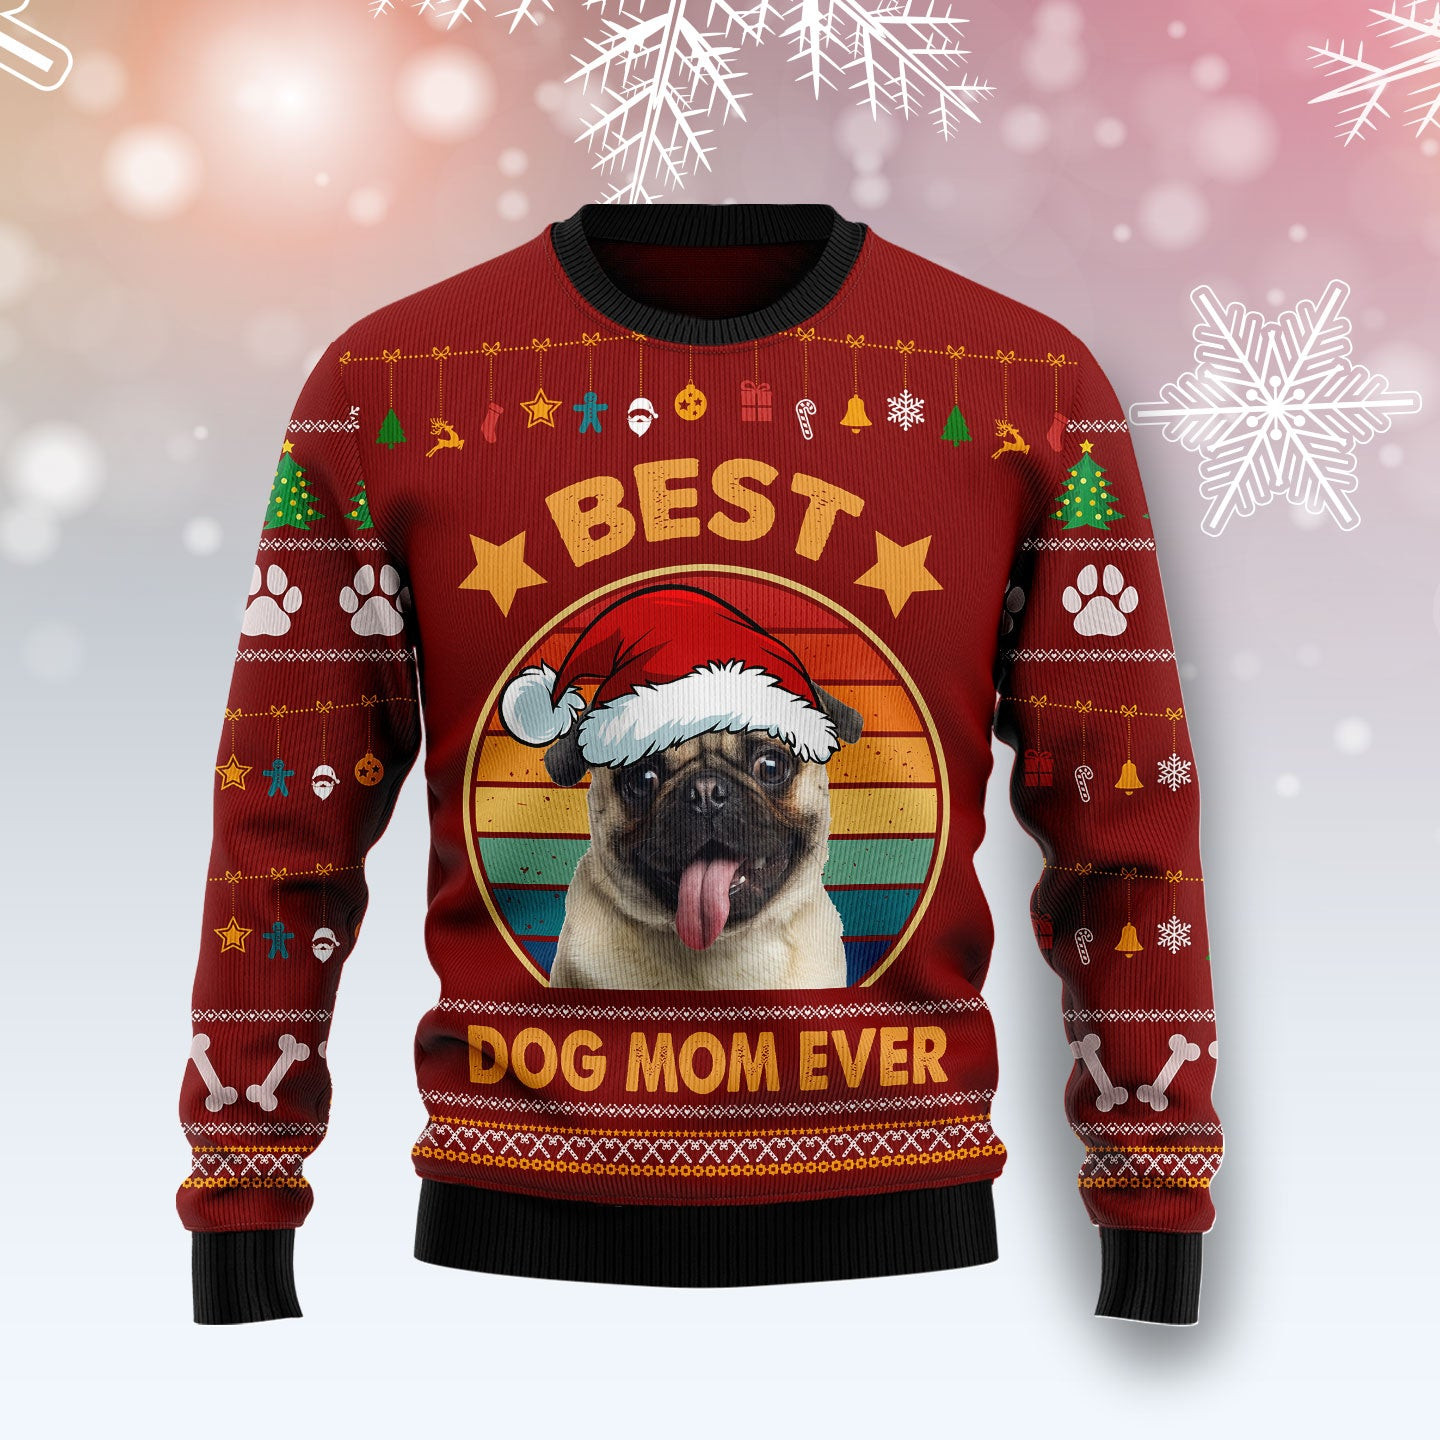 Pug Best Dog Mom Ever Ugly Christmas Sweater, Ugly Sweater For Men Women, Holiday Sweater